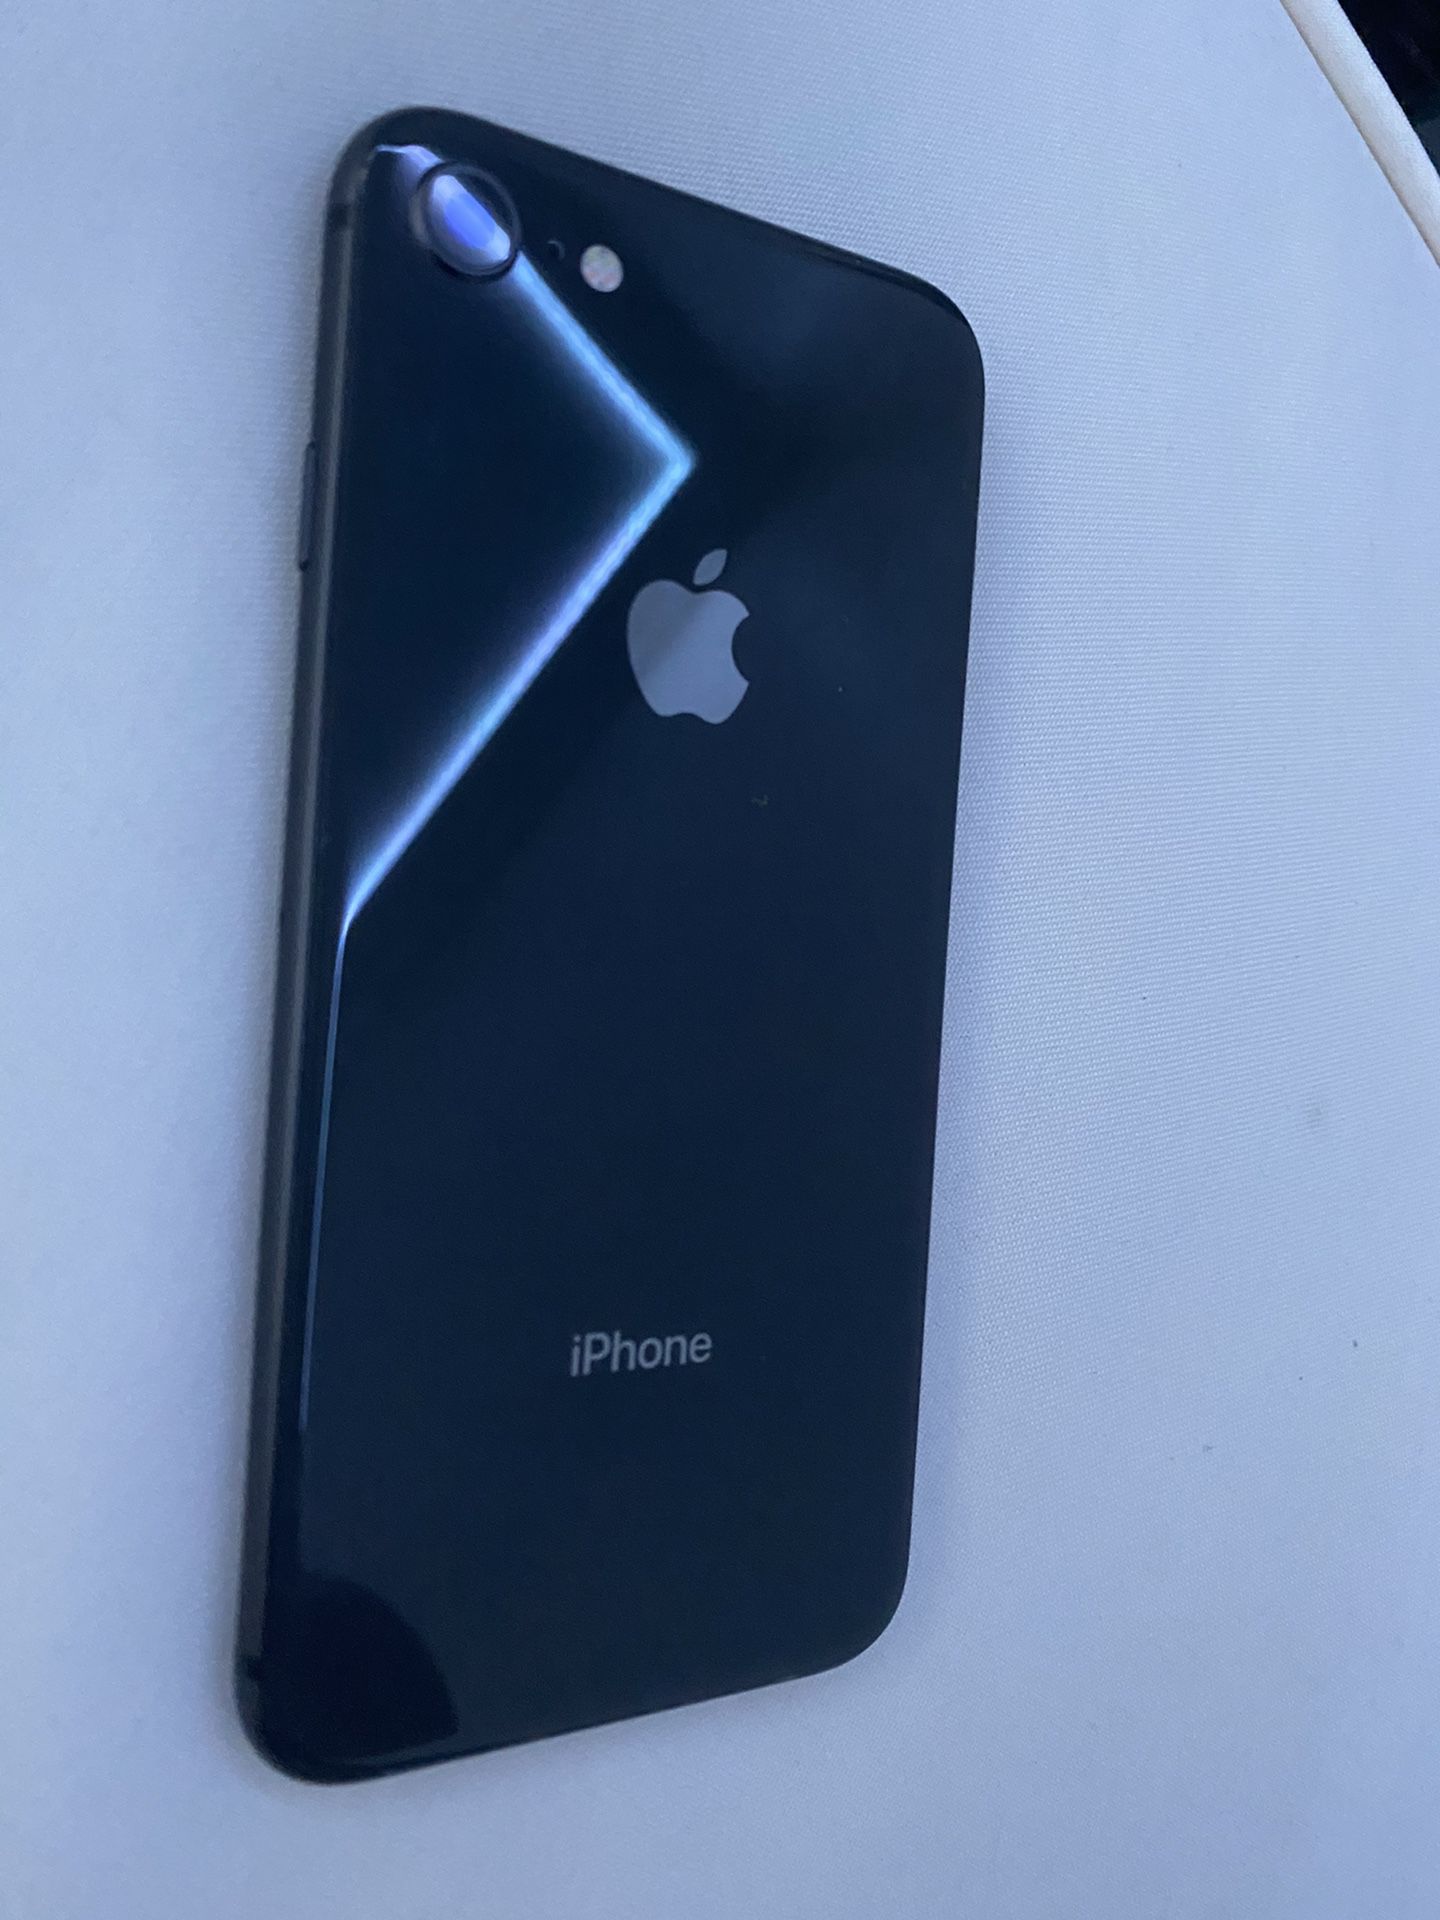 iPhone 8 excellent condition 64 gb unlocked